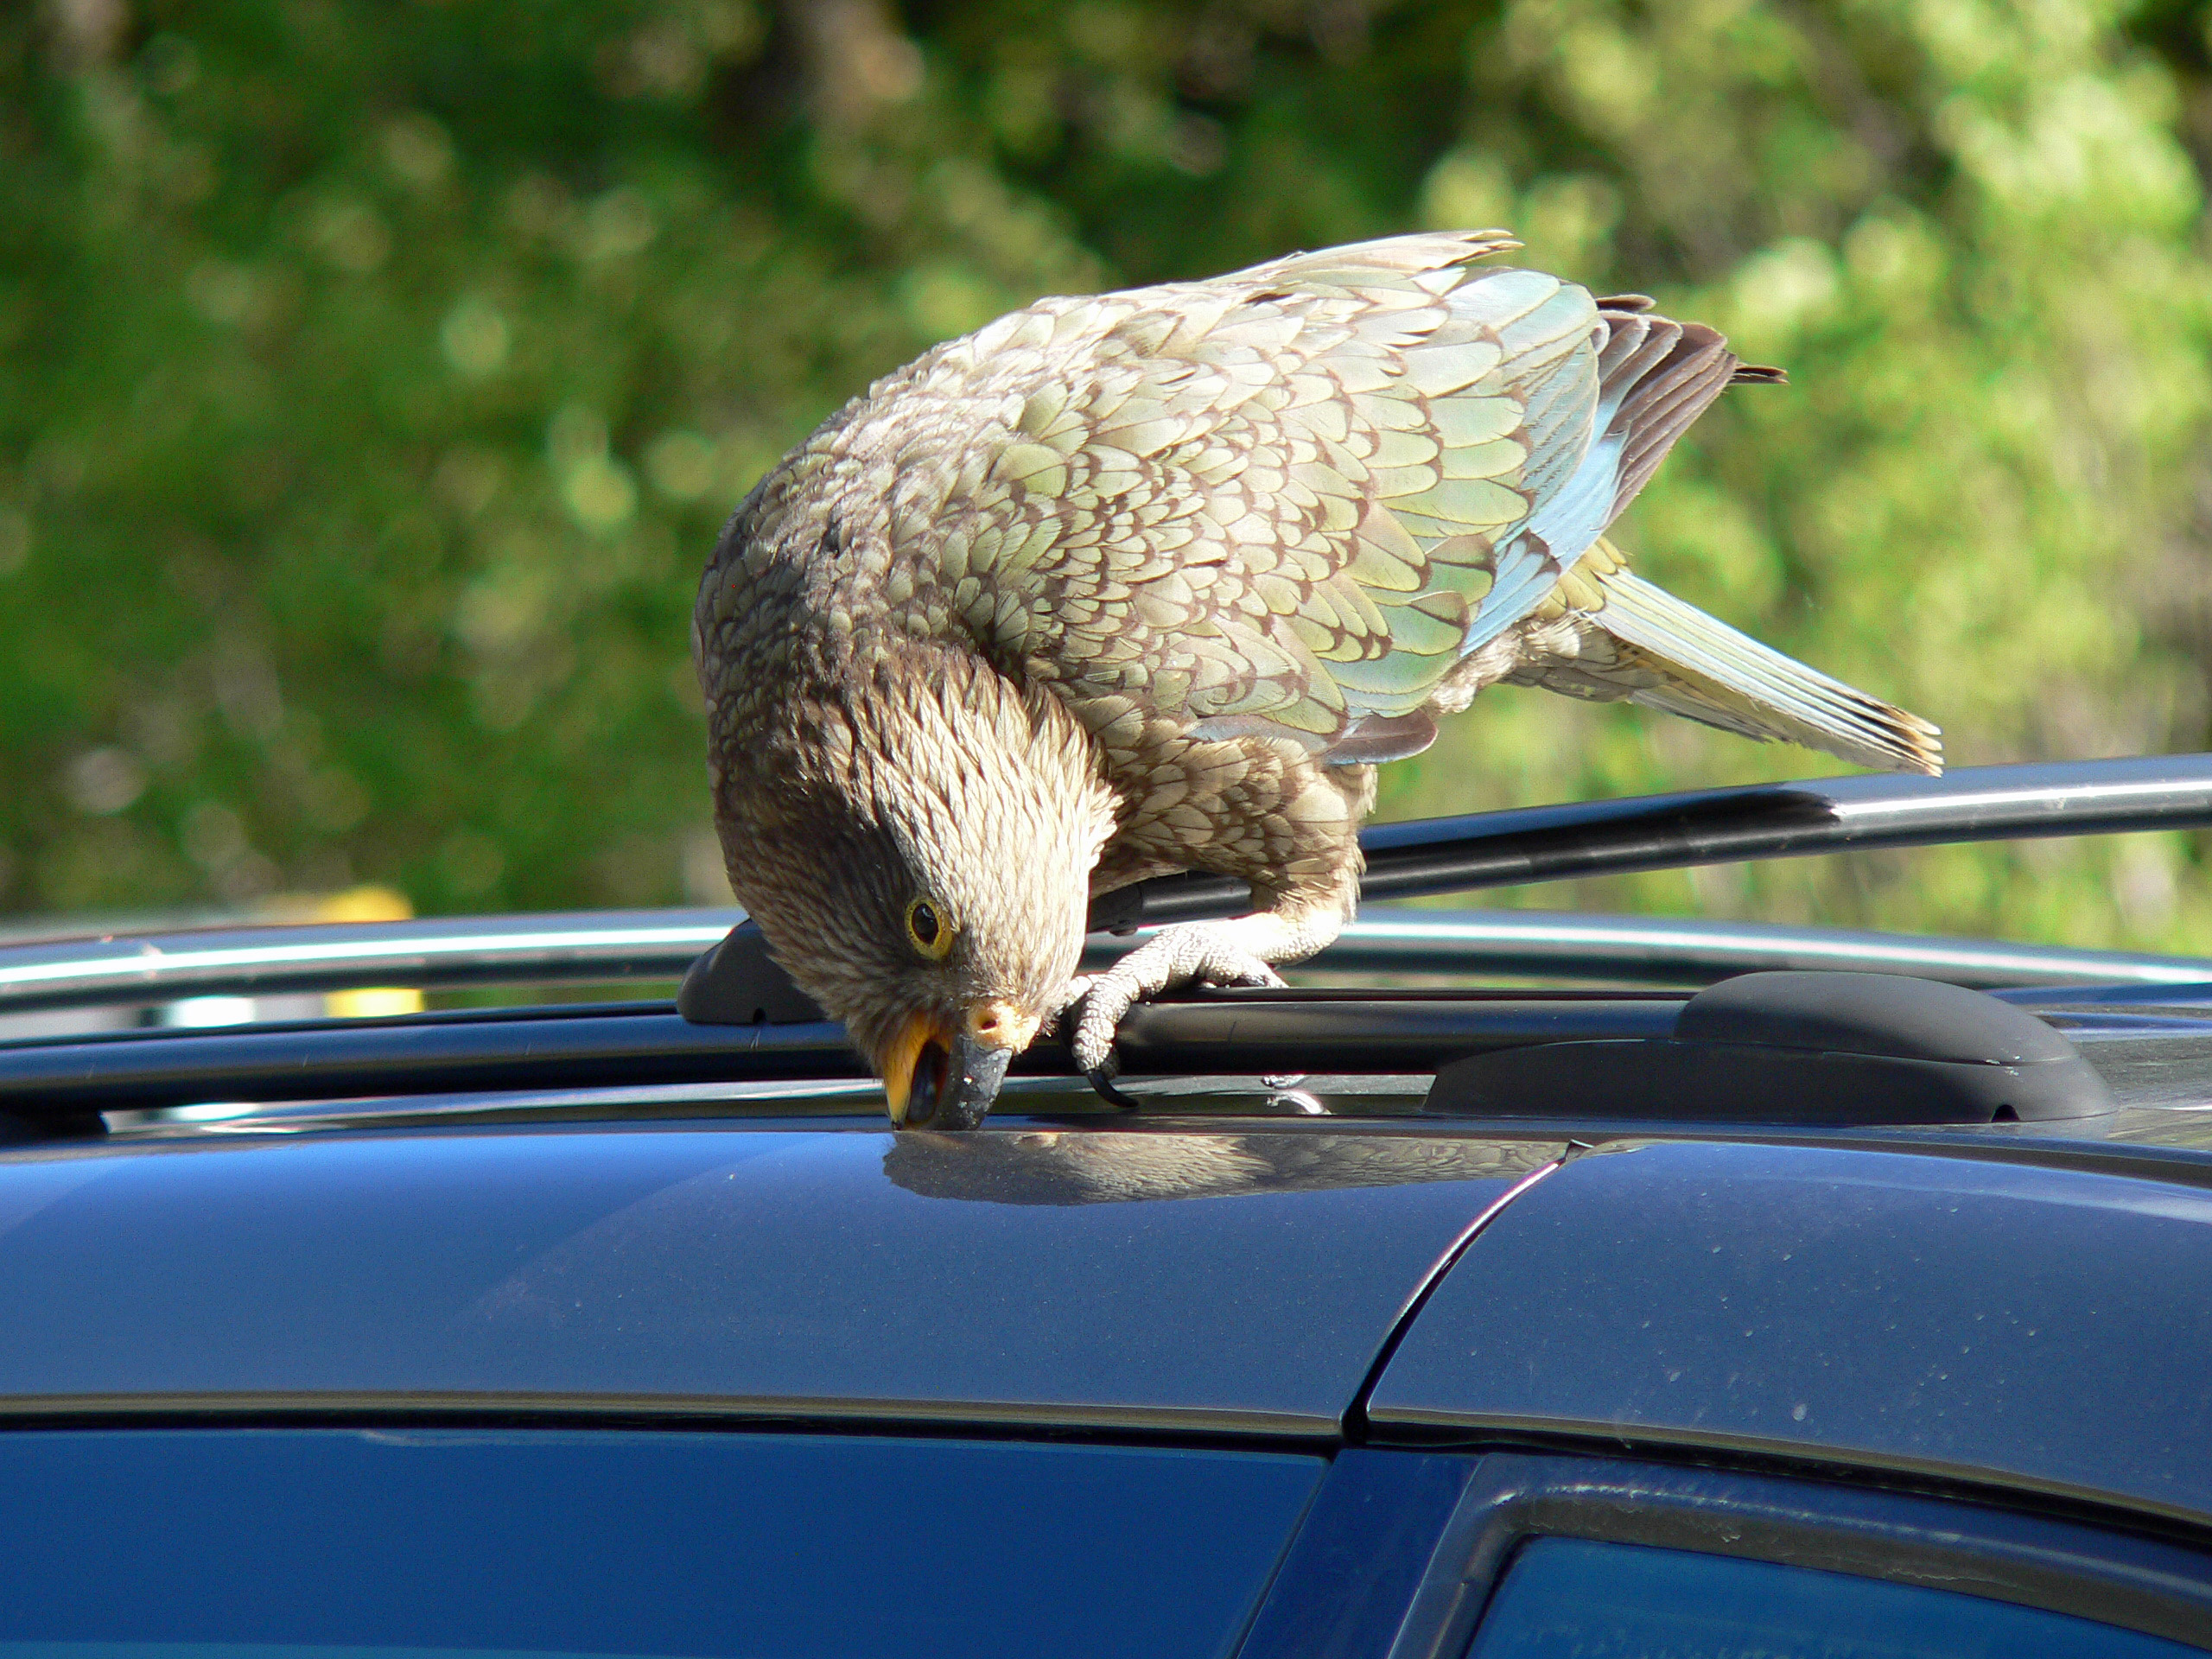 Interestingly, a group of Kea is called a circus, while a group of crows is a murder. The common crow is on-par -or better- with the Kea in terms of ...